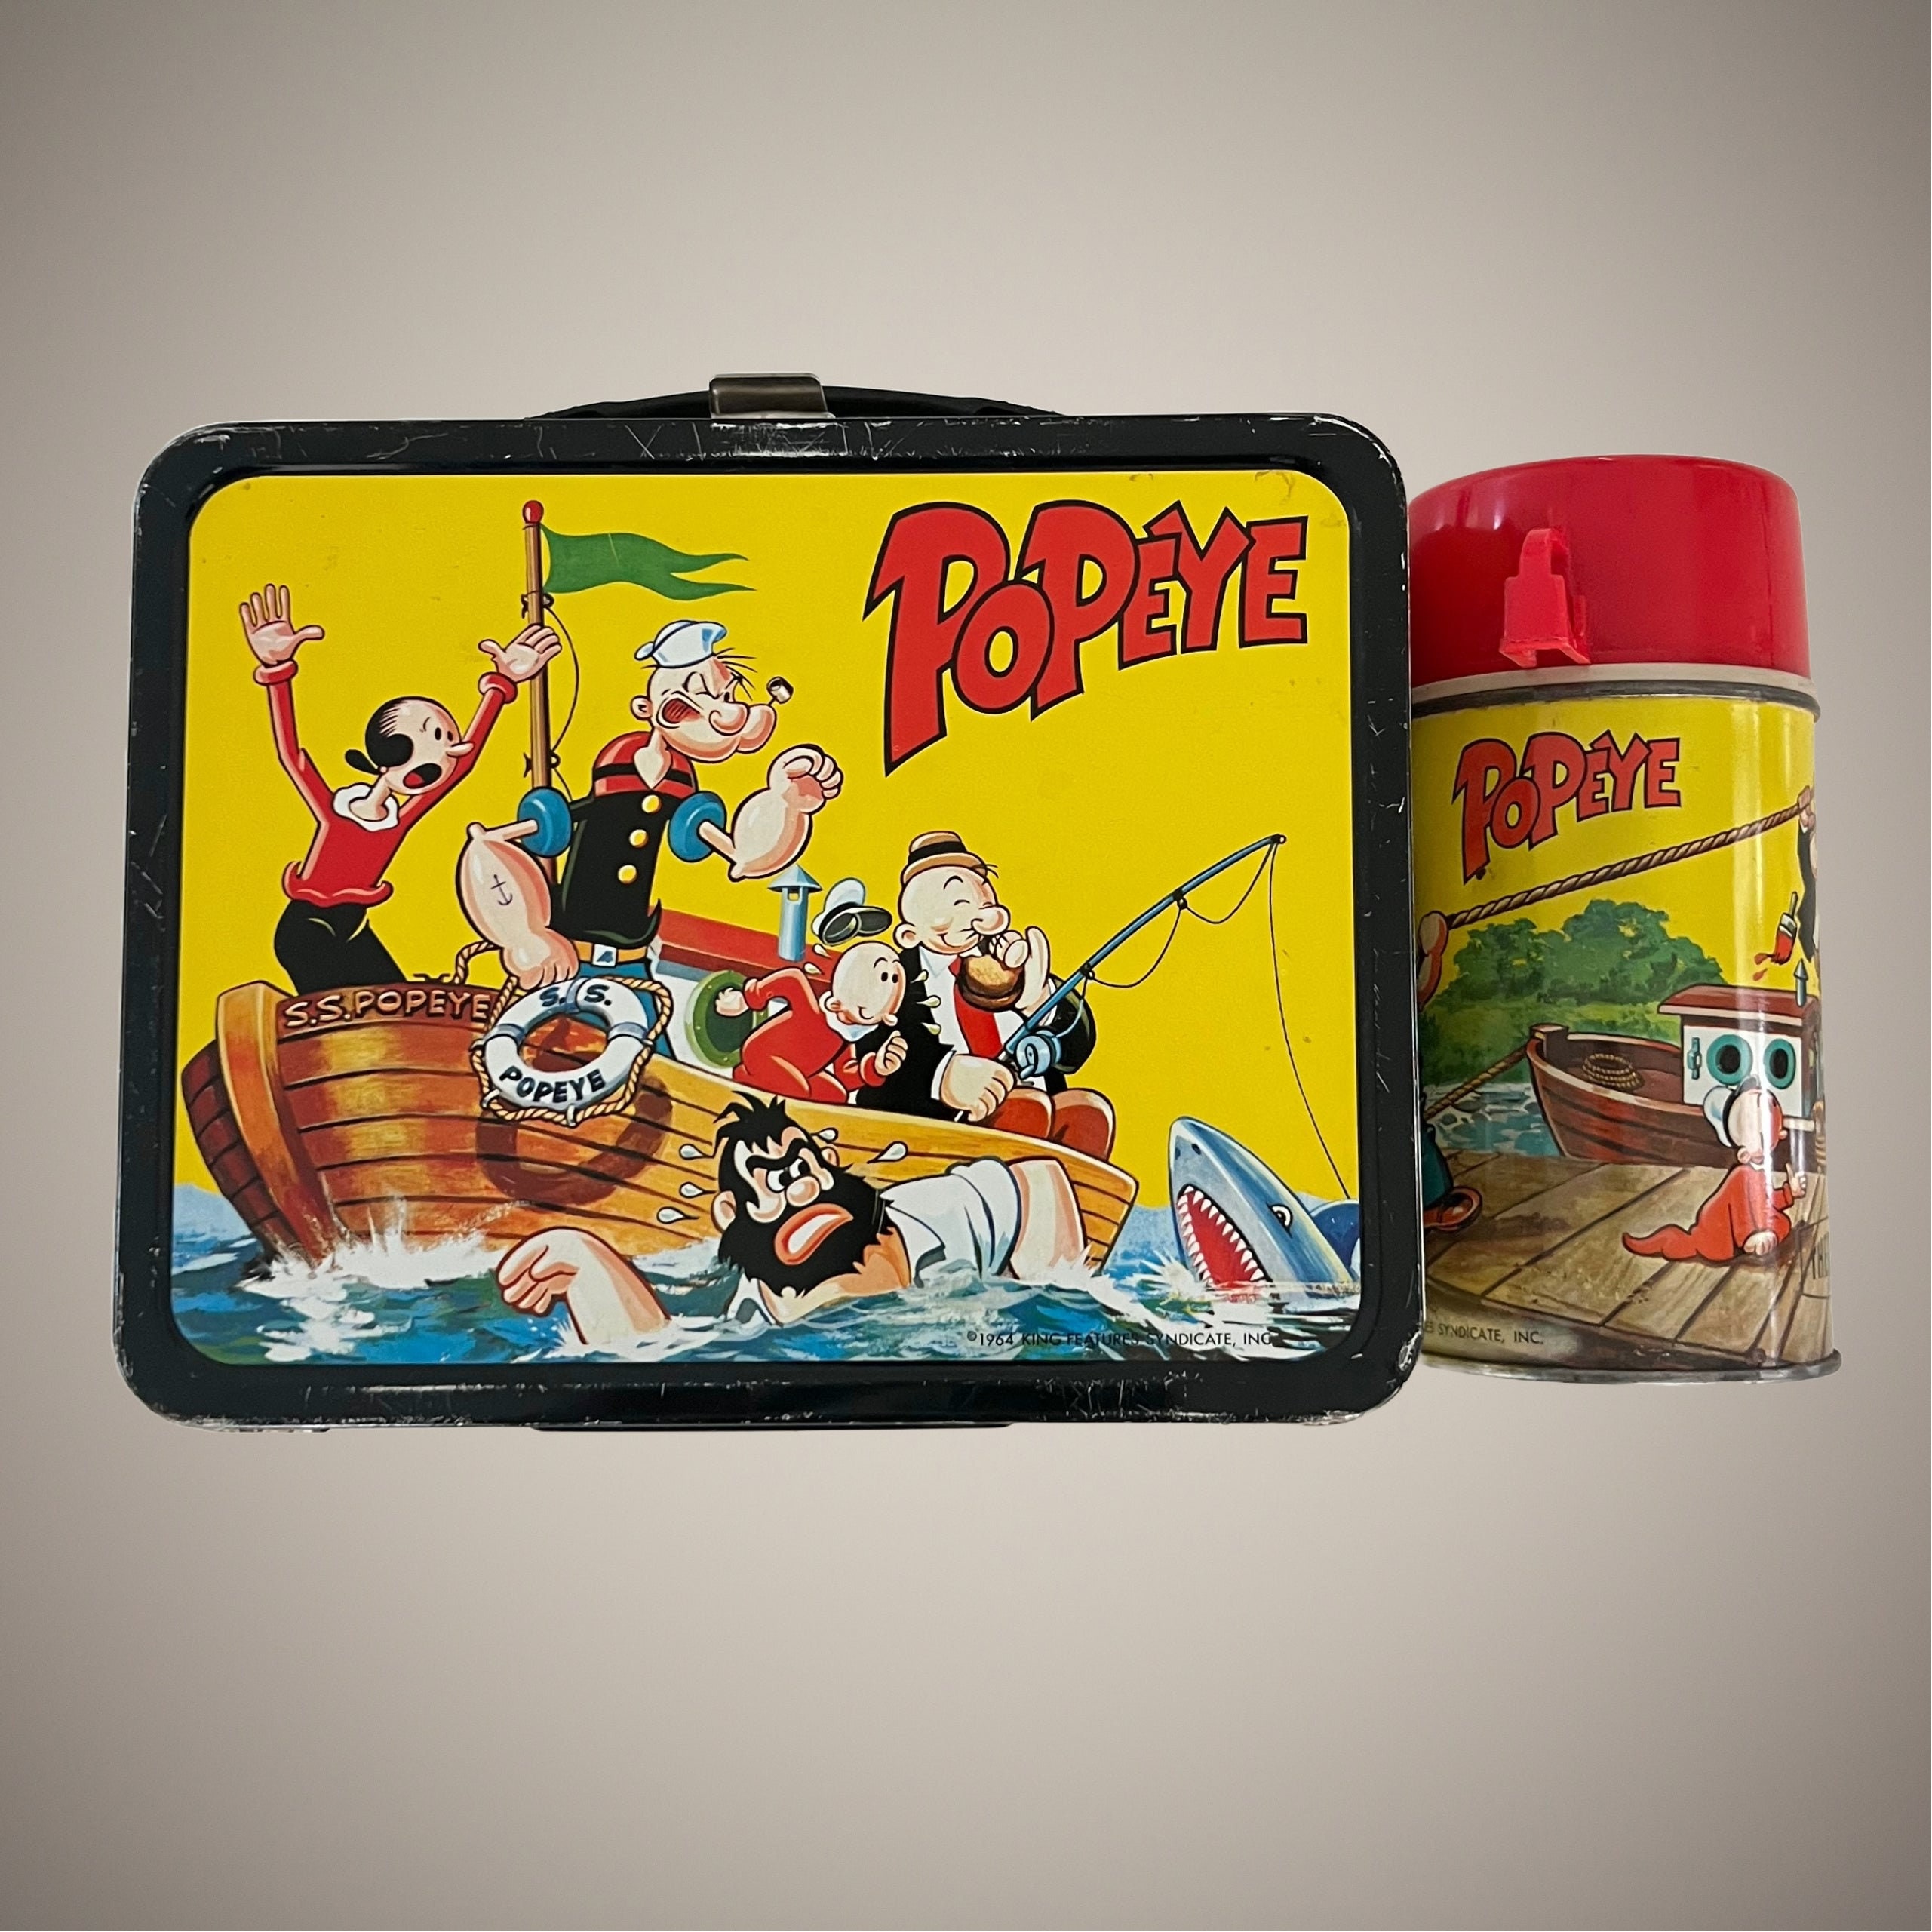 Astro Boy Lunch Box with Thermos Bottle